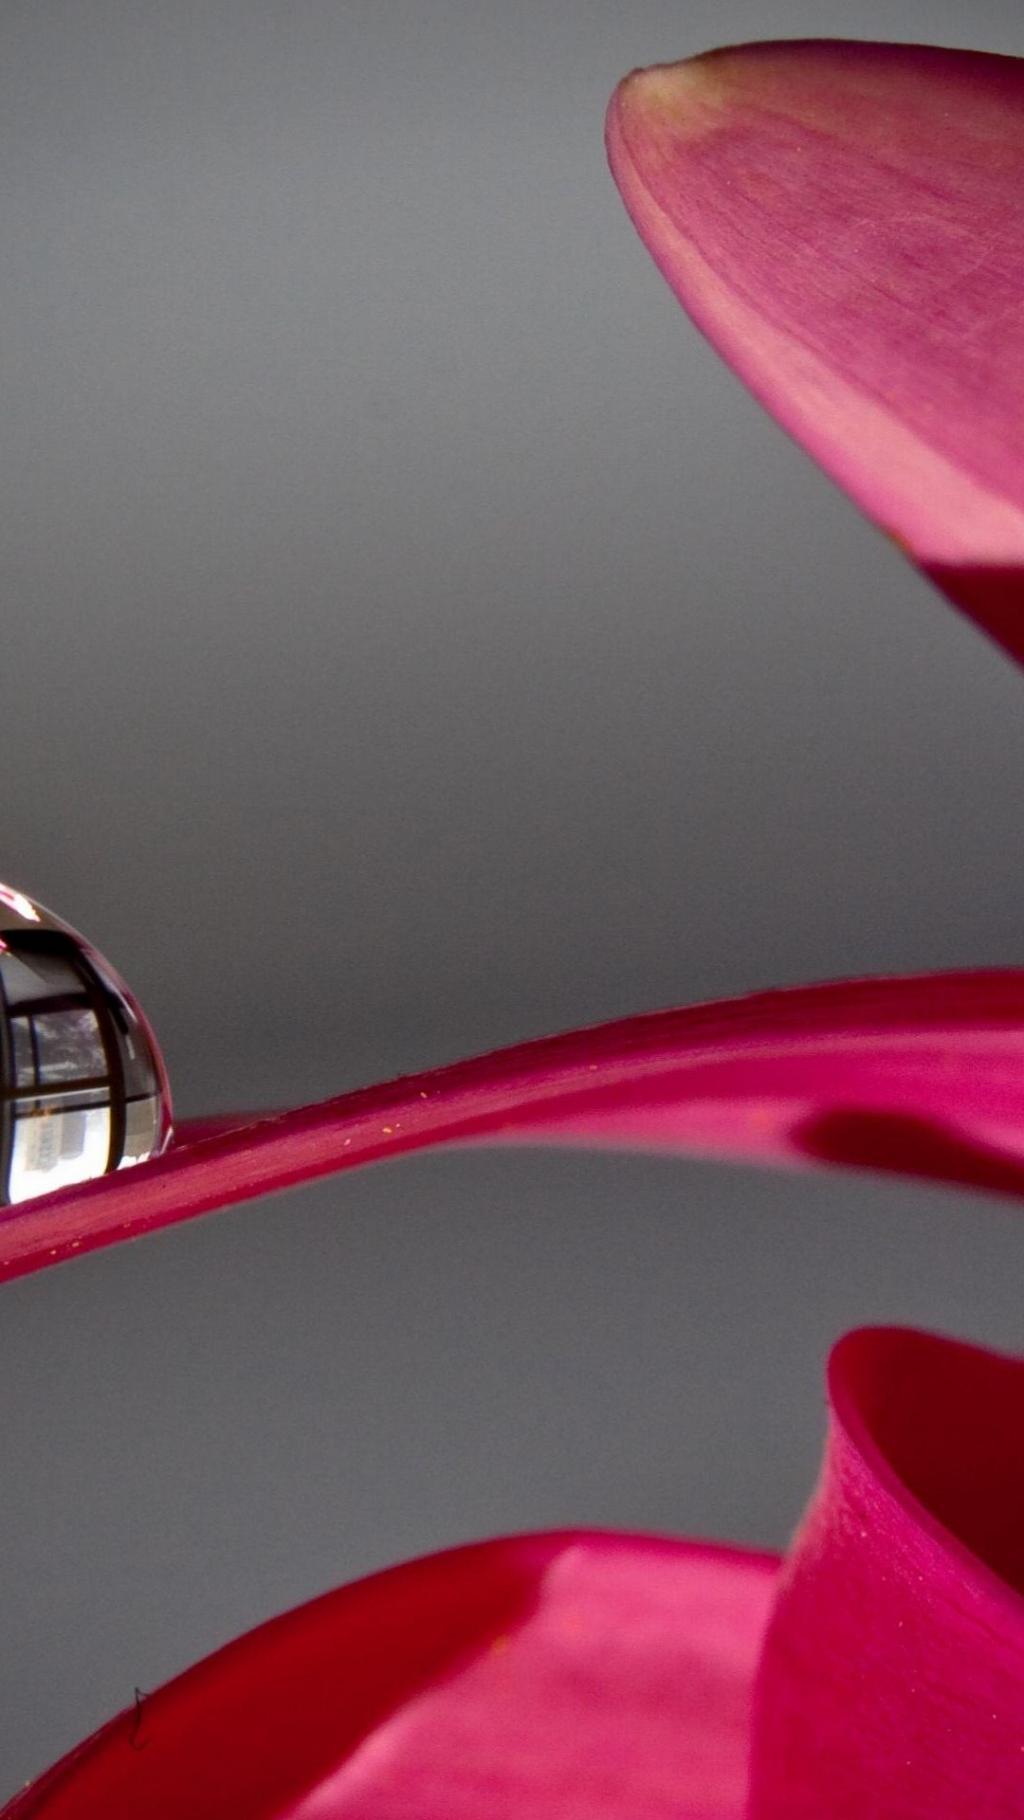 Water droplets on red petals